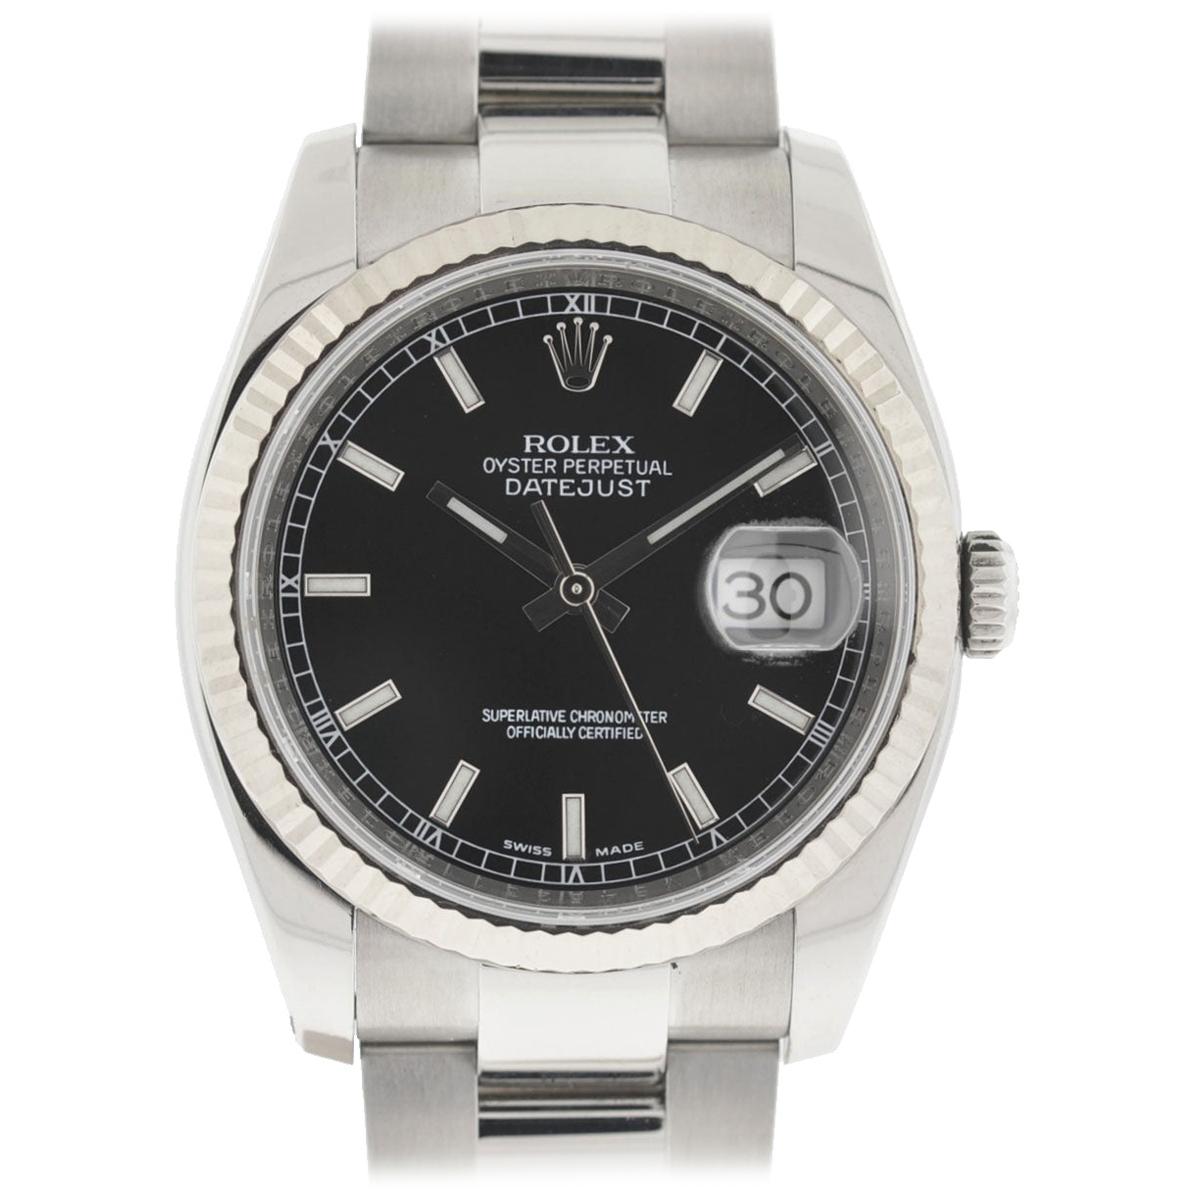 Rolex 116234 Datejust Stainless Steel Black Dial Automatic Watch